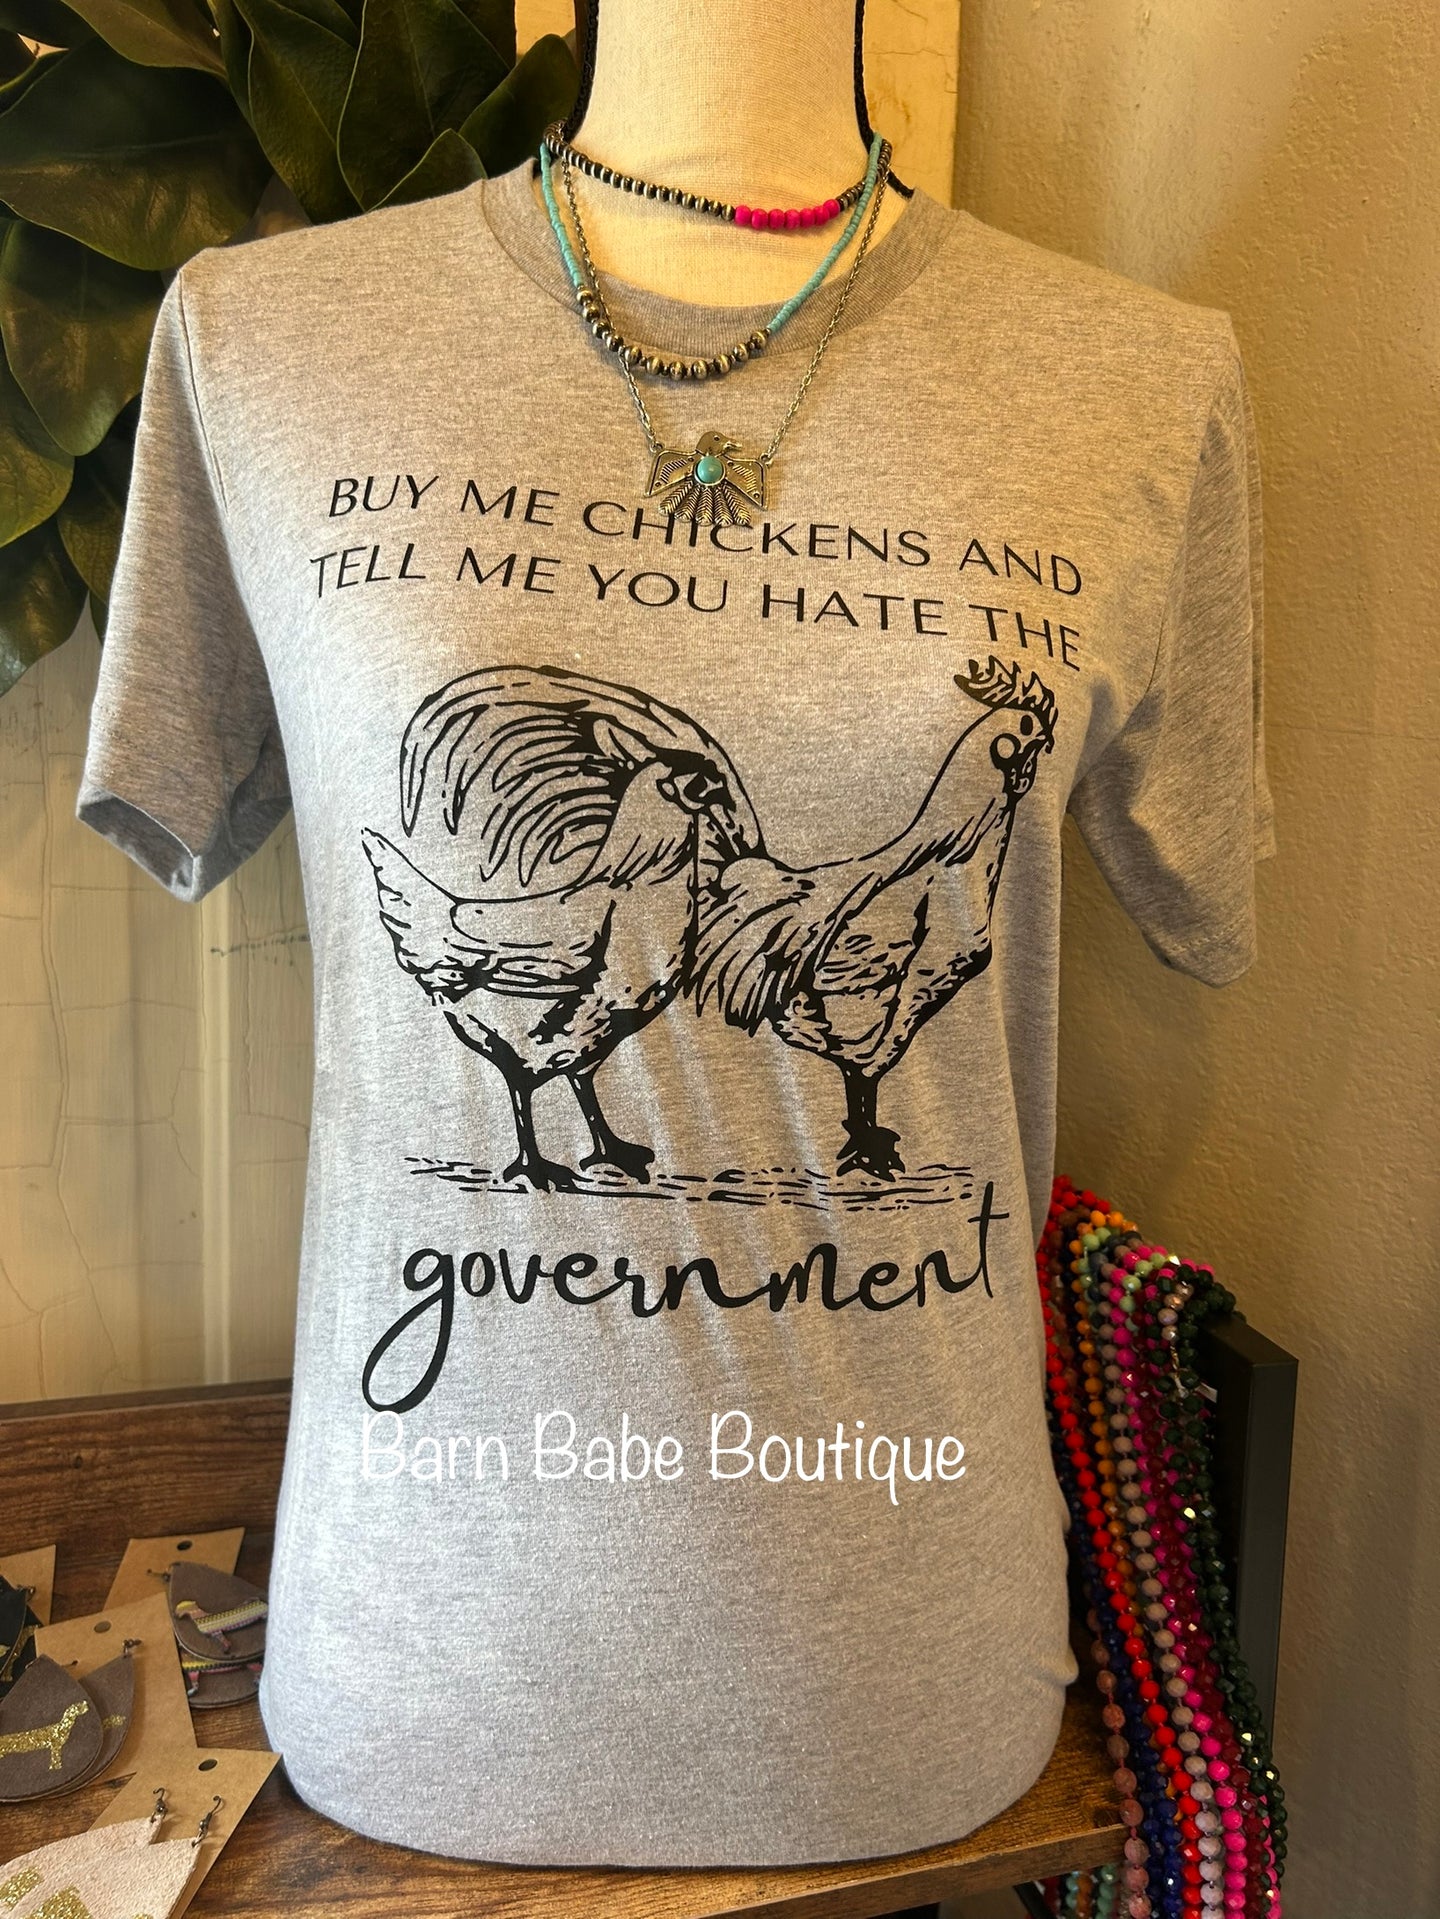 Buy Me Chickens and Tell Me You Hate the Government Tee